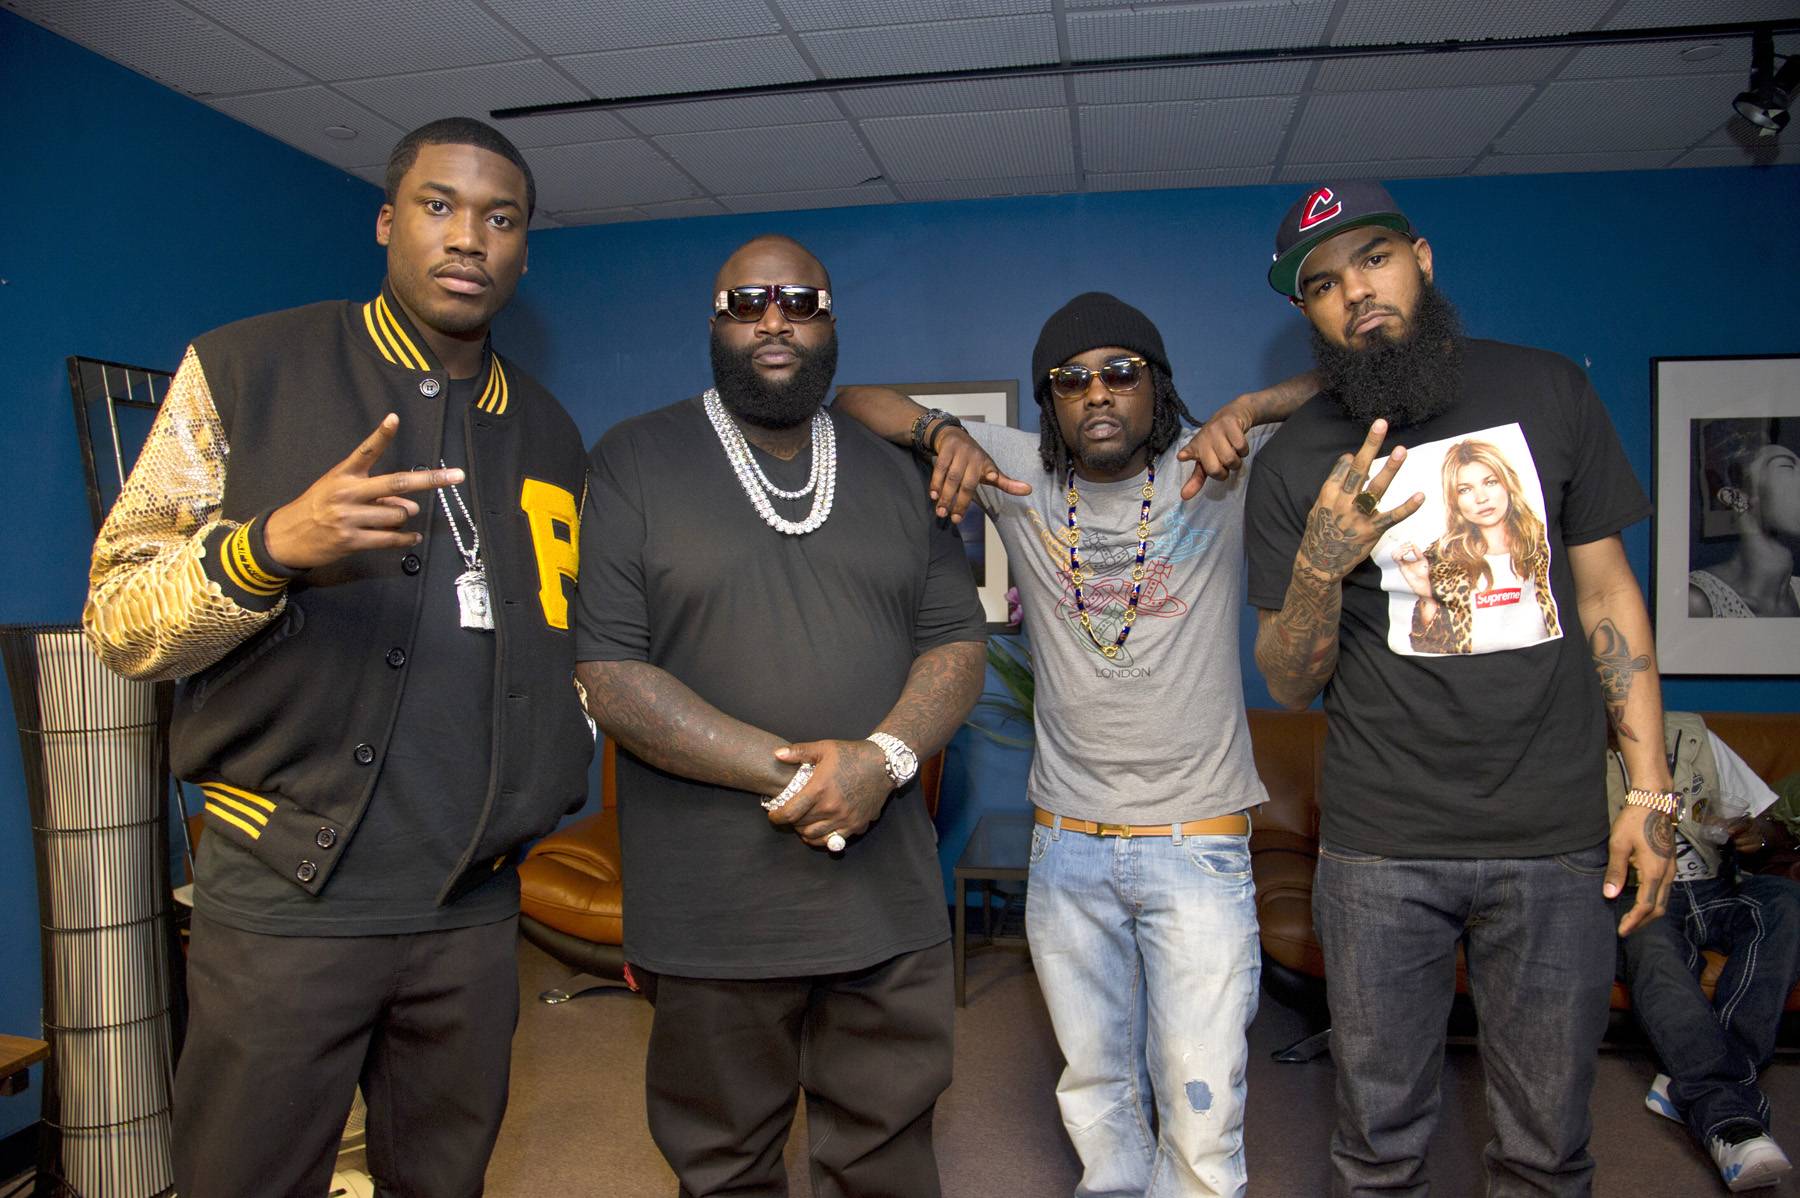 The MMG Crew - MMG (Meek Mill, Rick Ross, Wale, Stalley) in the green room at 106 &amp; Park, March 13, 2012. (Photo: John Ricard / BET)